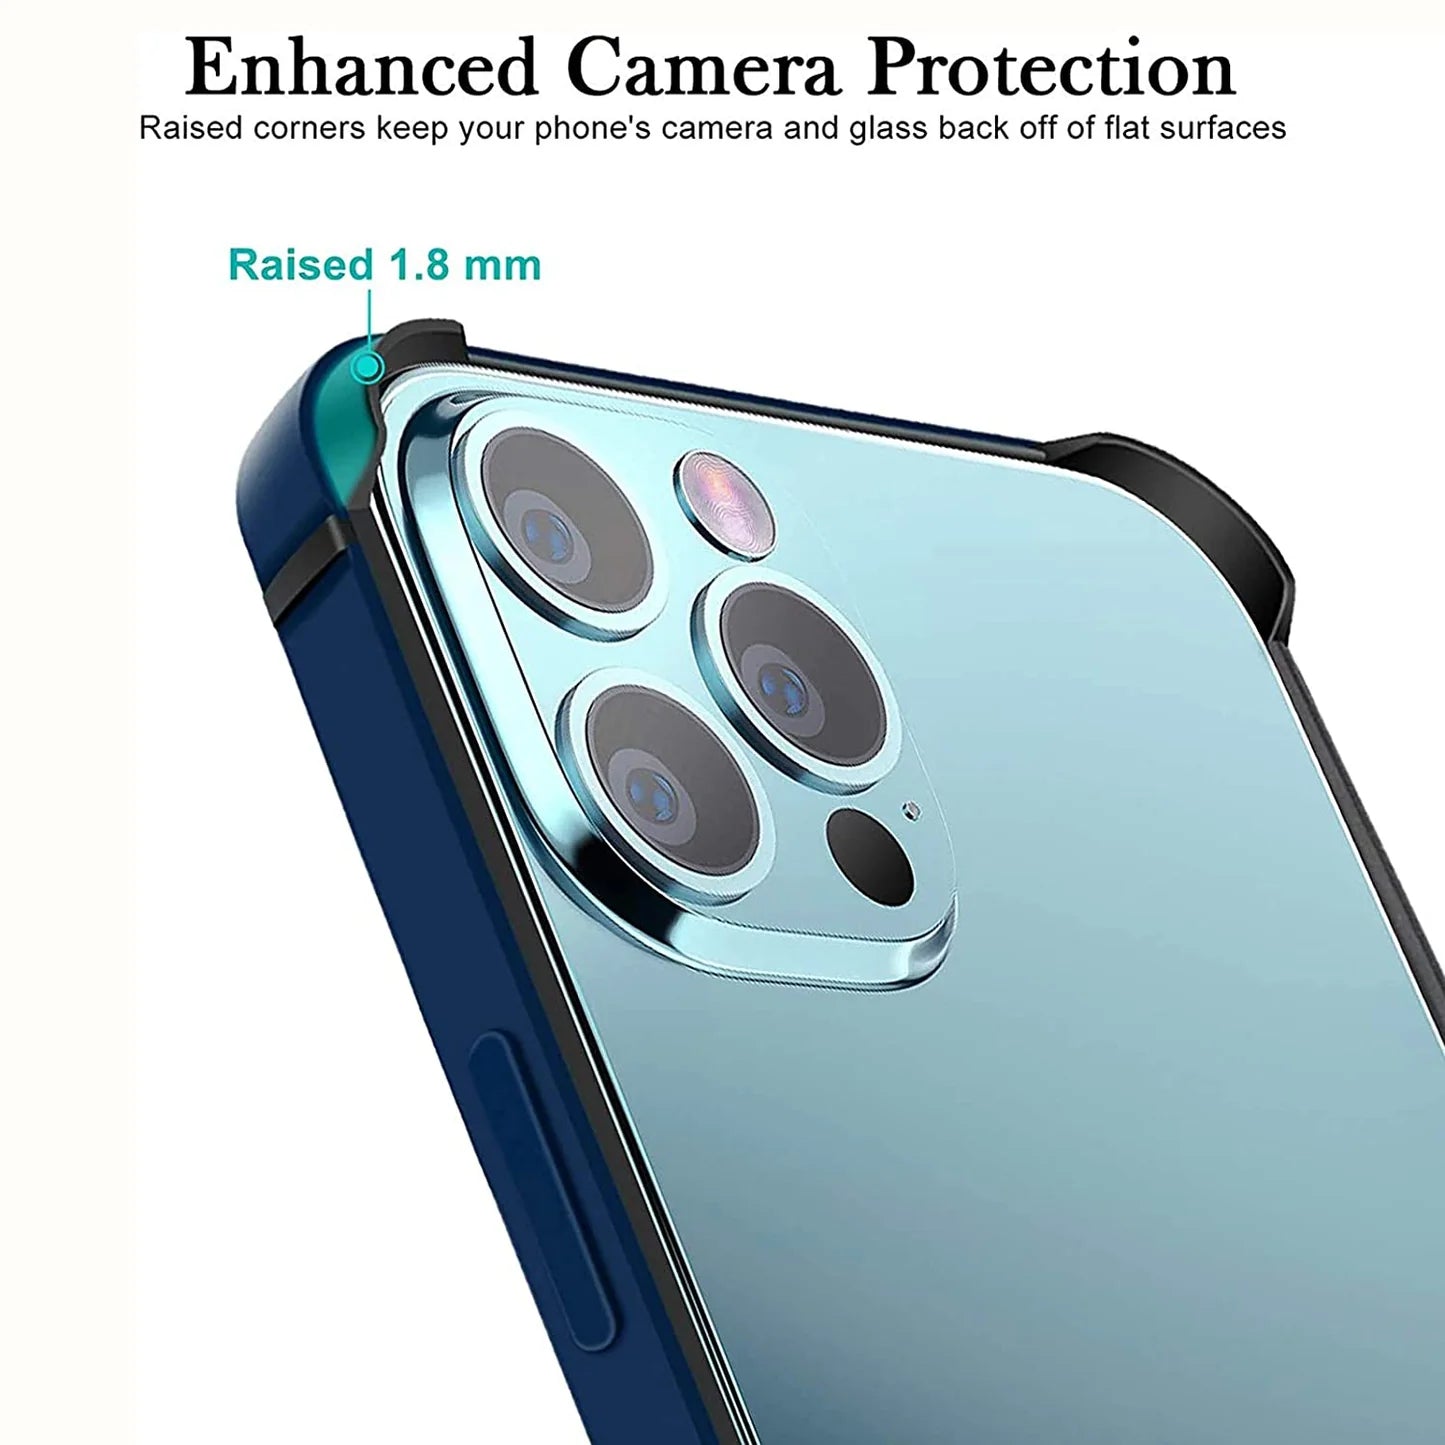 iPhone 13 Pro Bumper (Not a Case) Raised Bezels for Lens Protection.